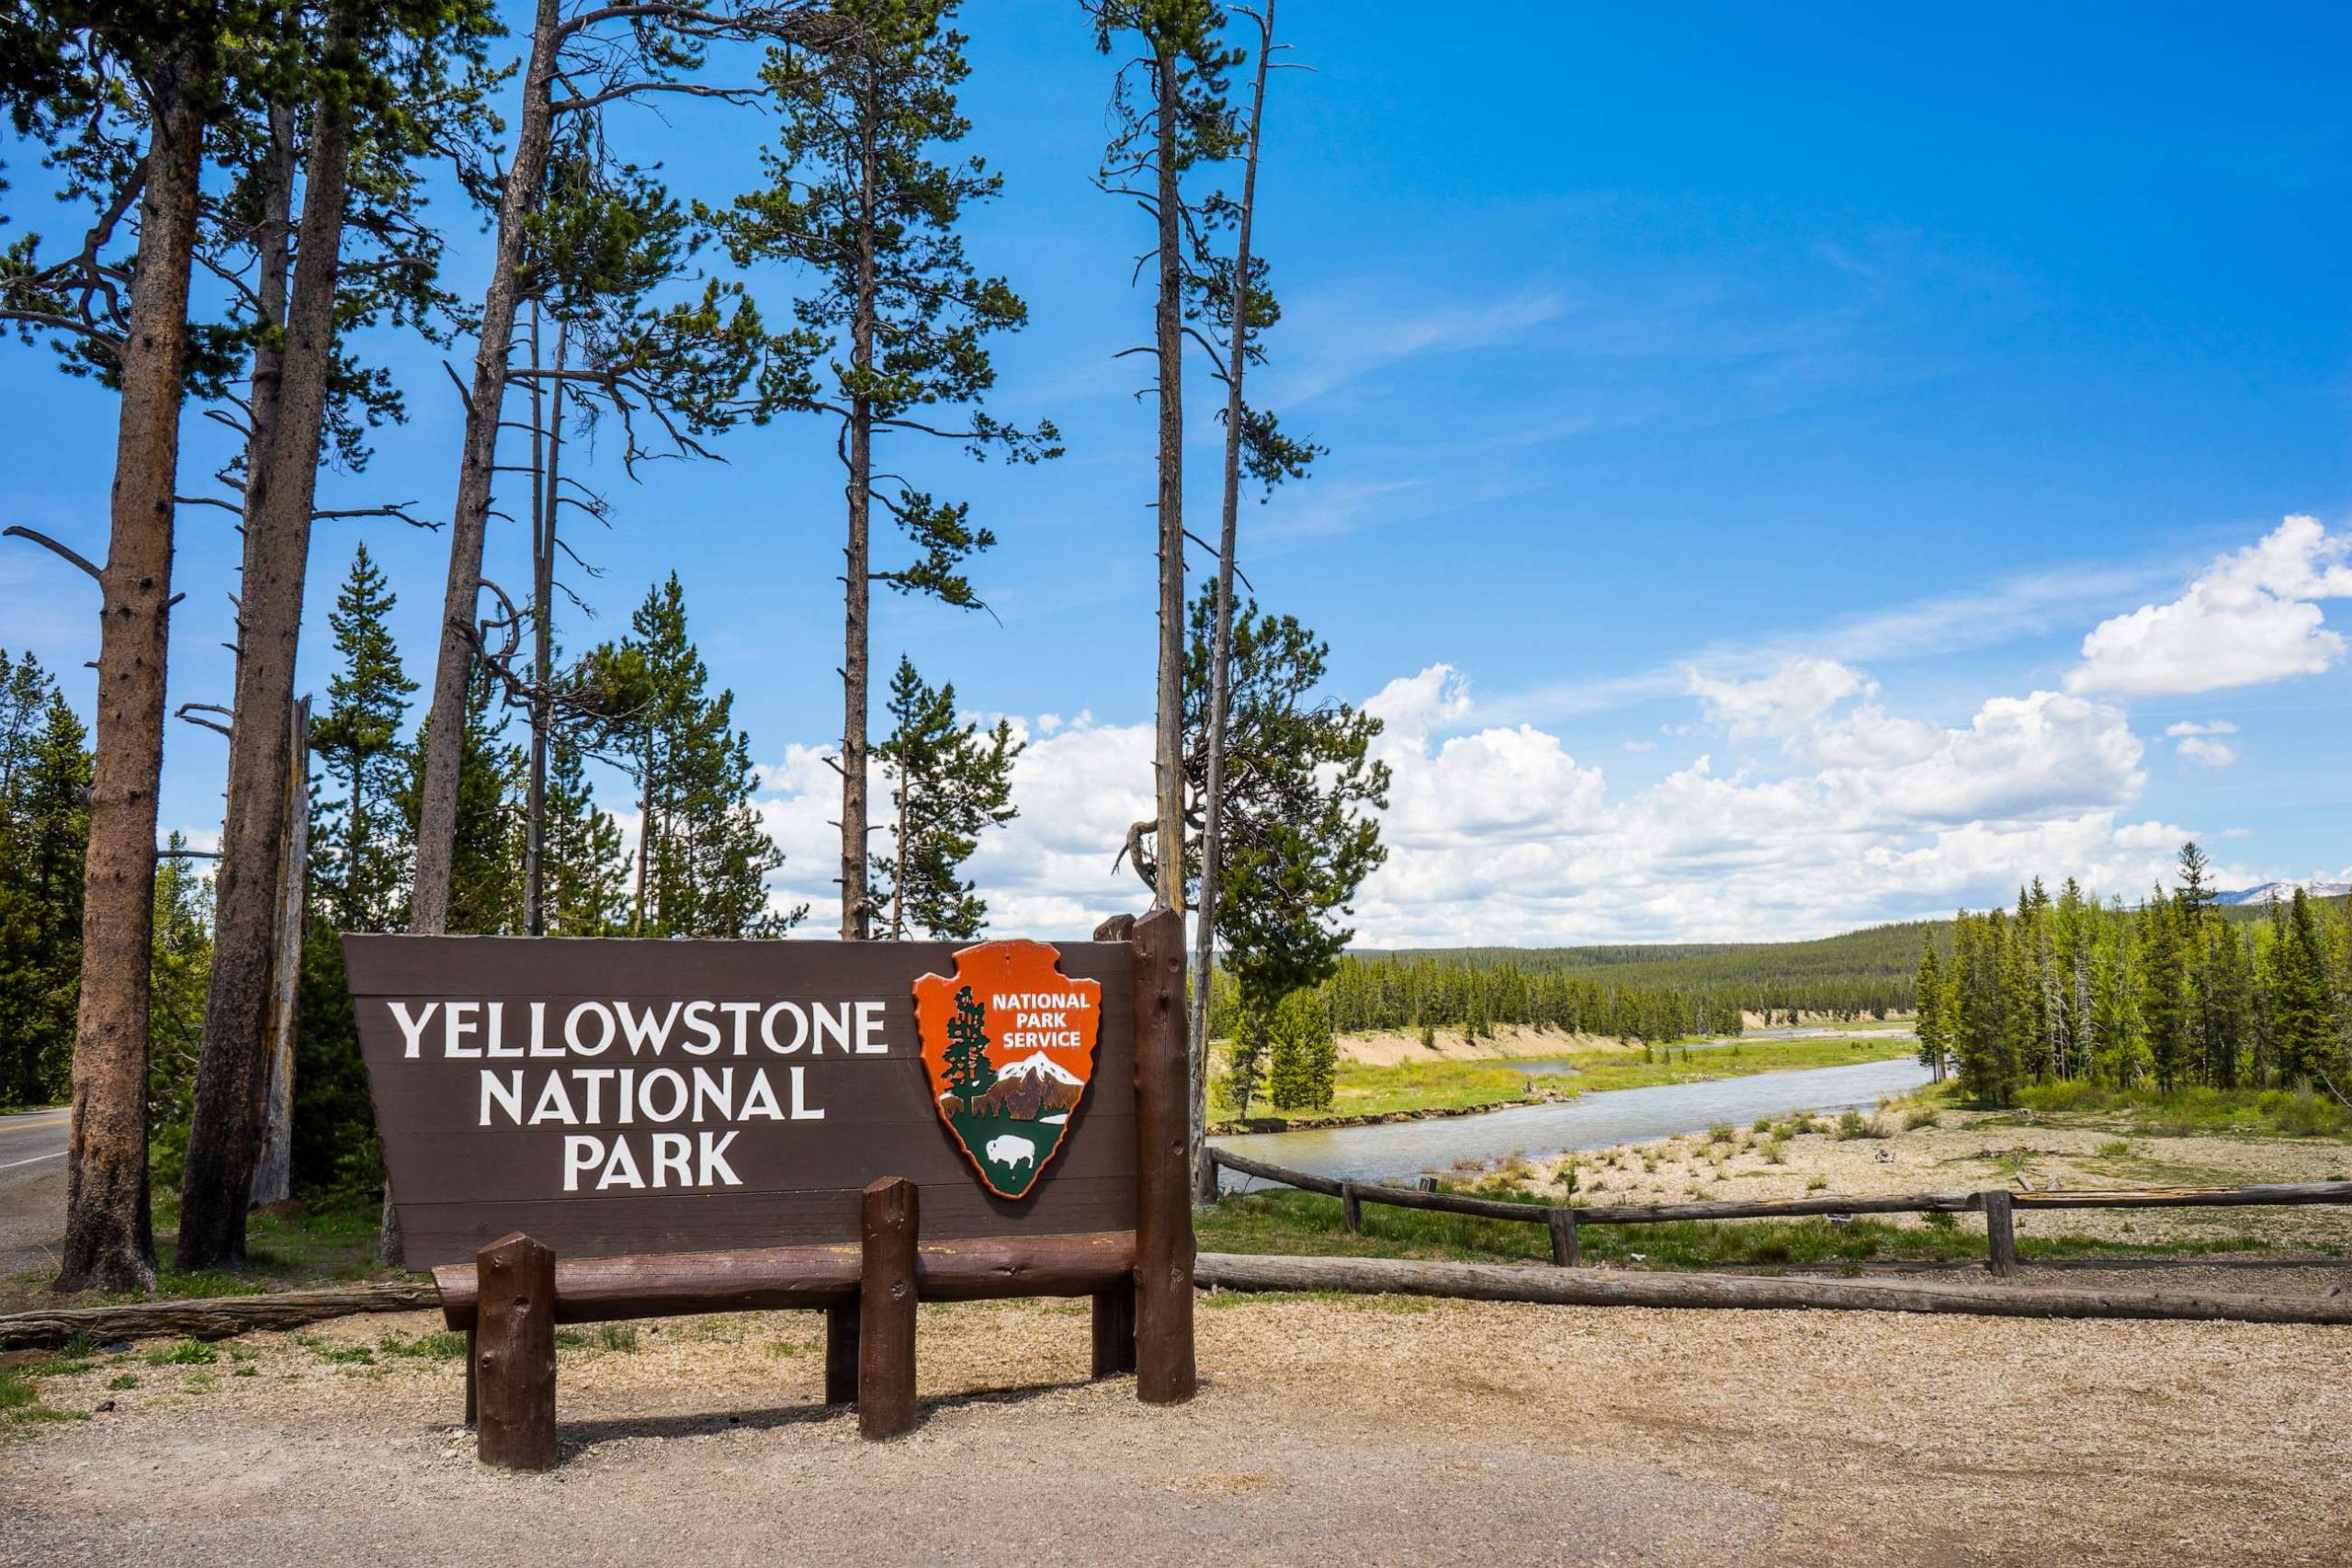 Park rangers at Yellowstone National Park fatally shoot suspect after alleged threats made